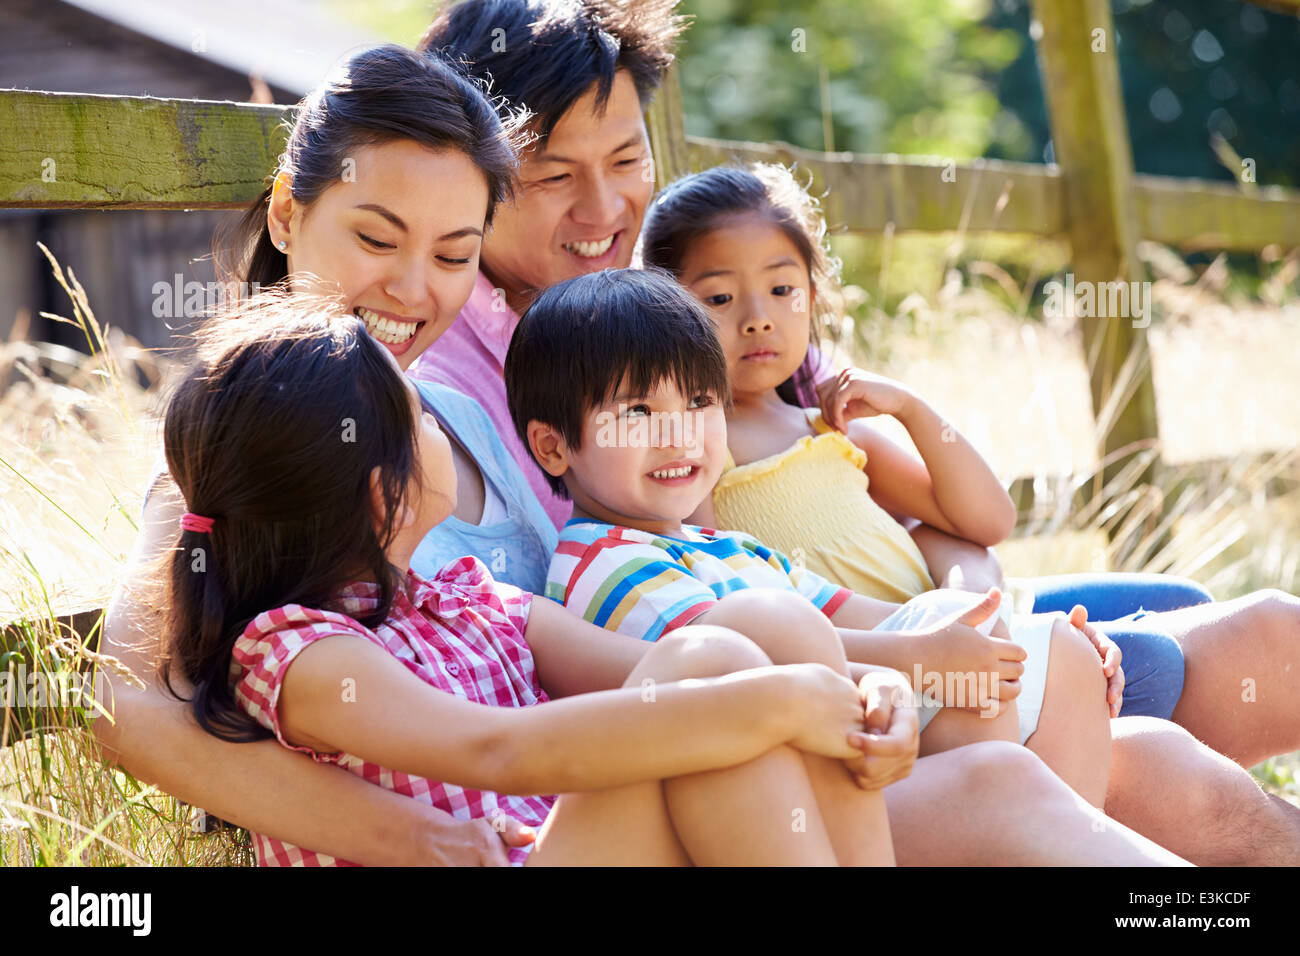 Asian Family Relaxing By Gate On Walk In Countryside Stock Photo